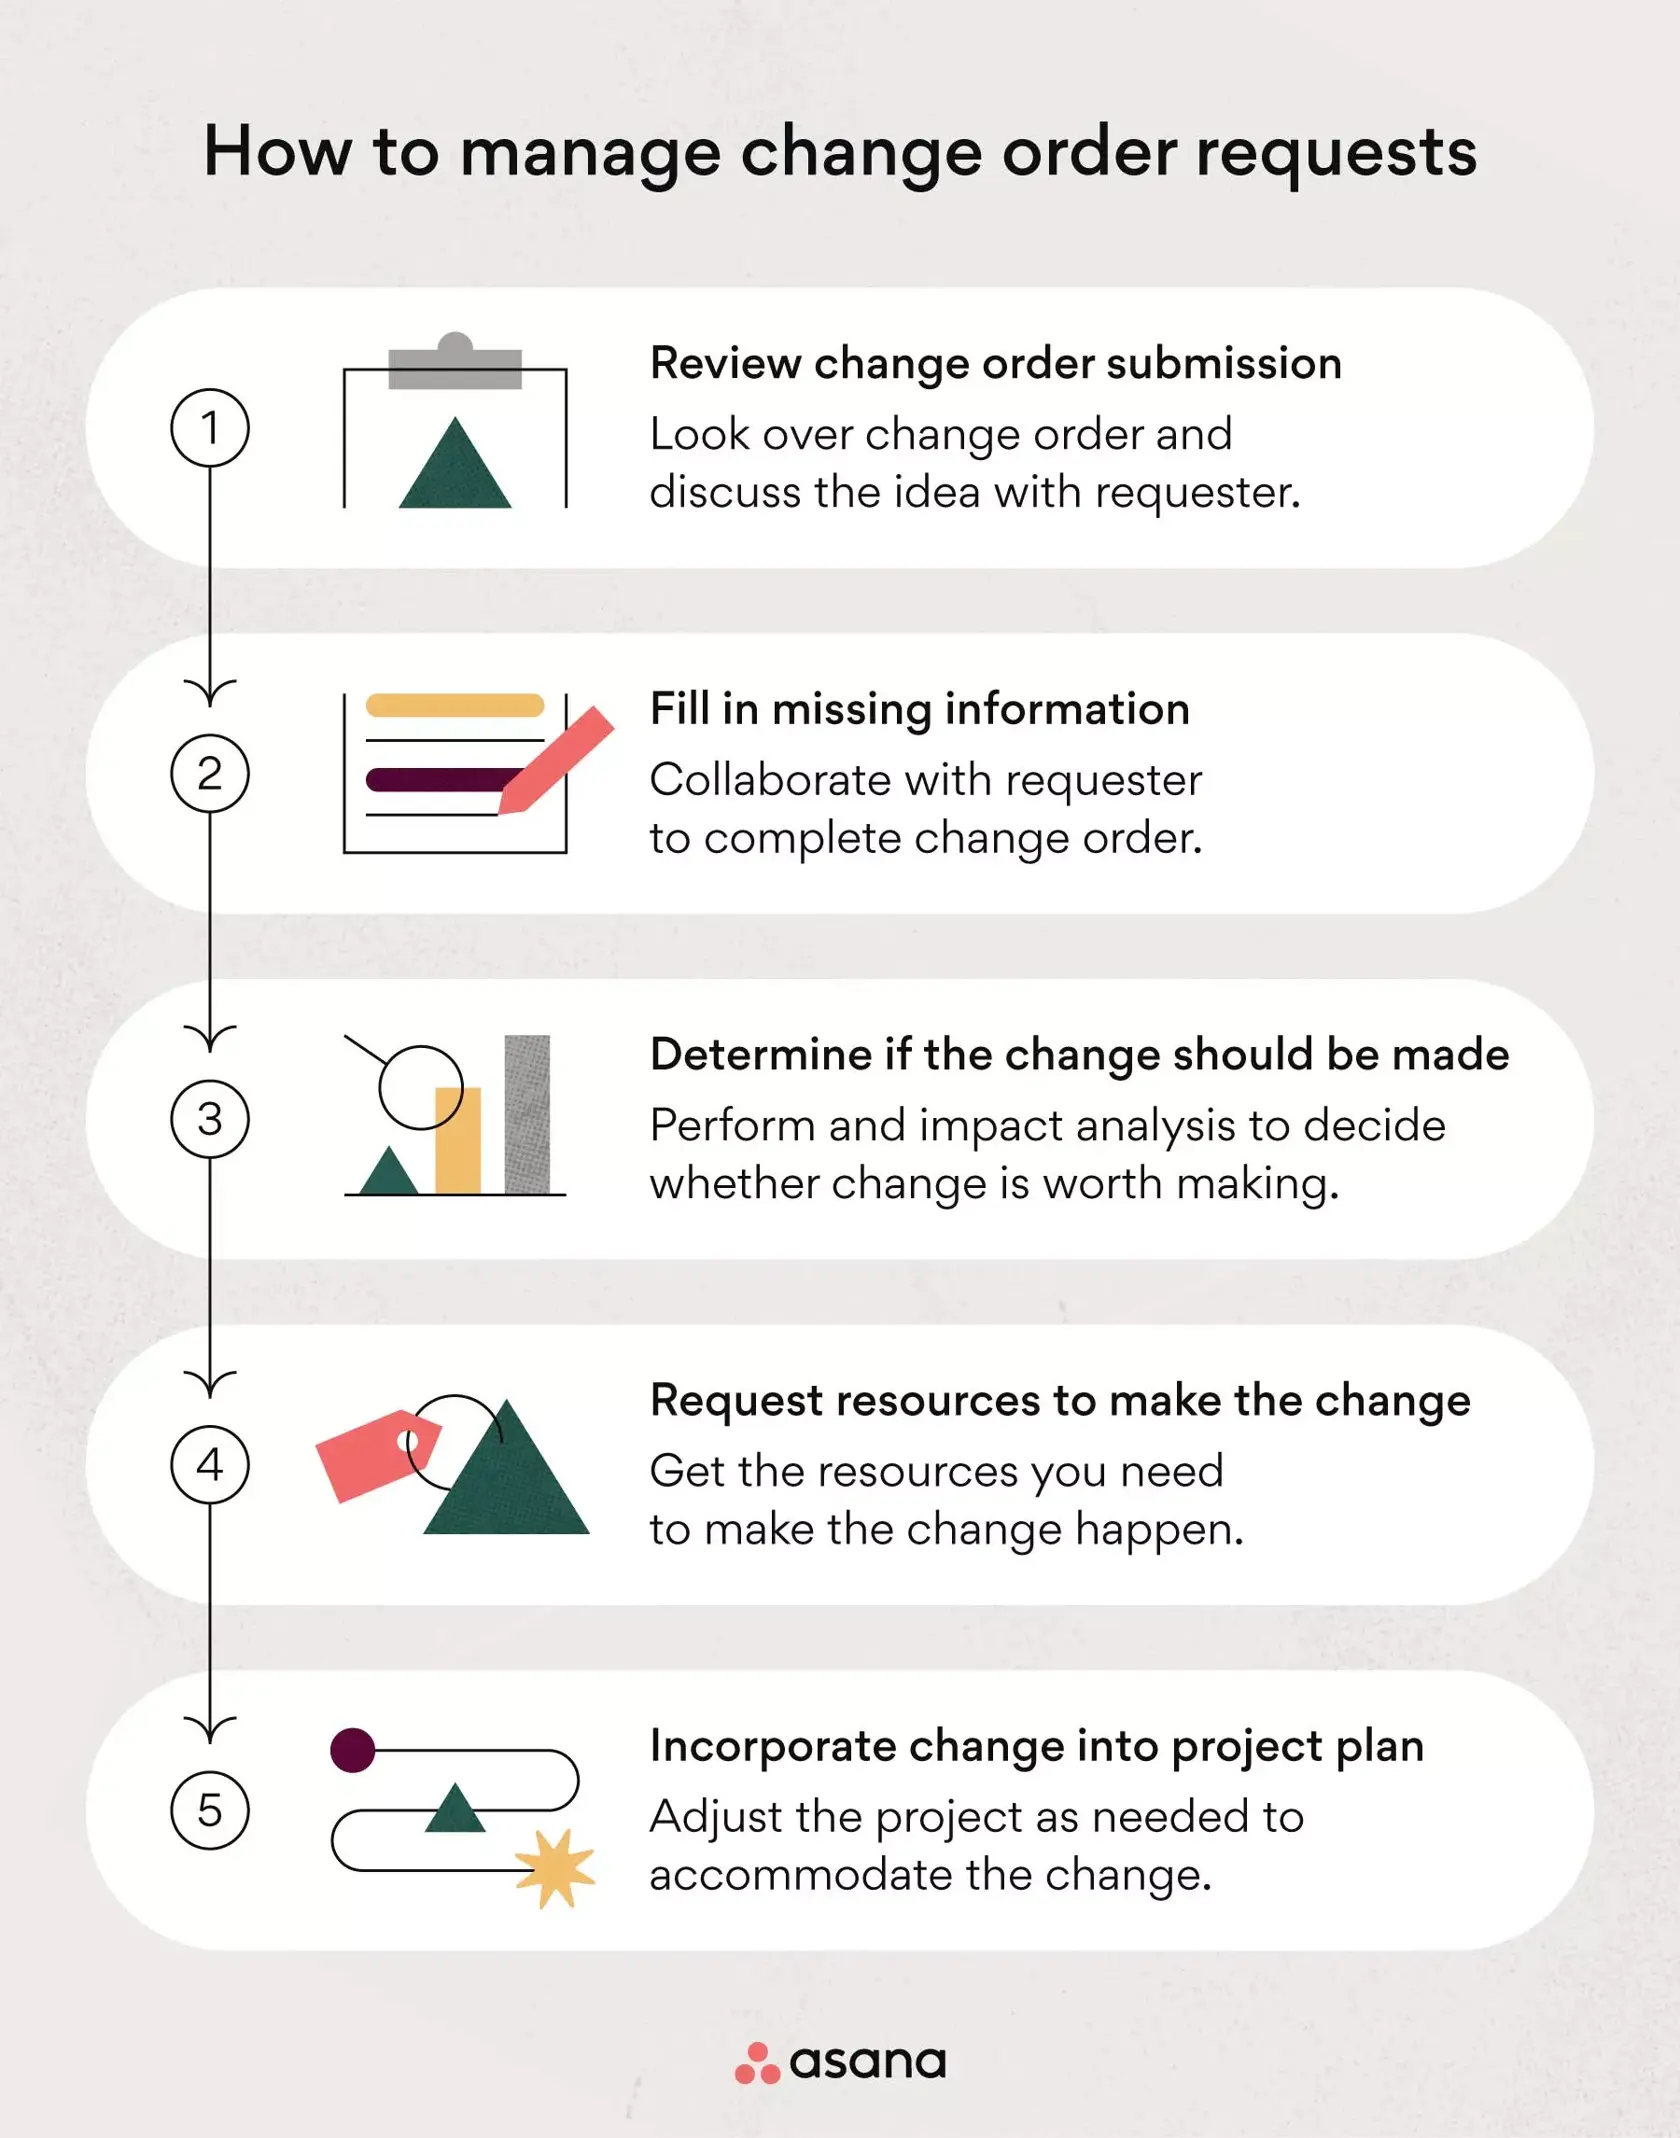 [inline illustration] How to manage change order requests (infographic)